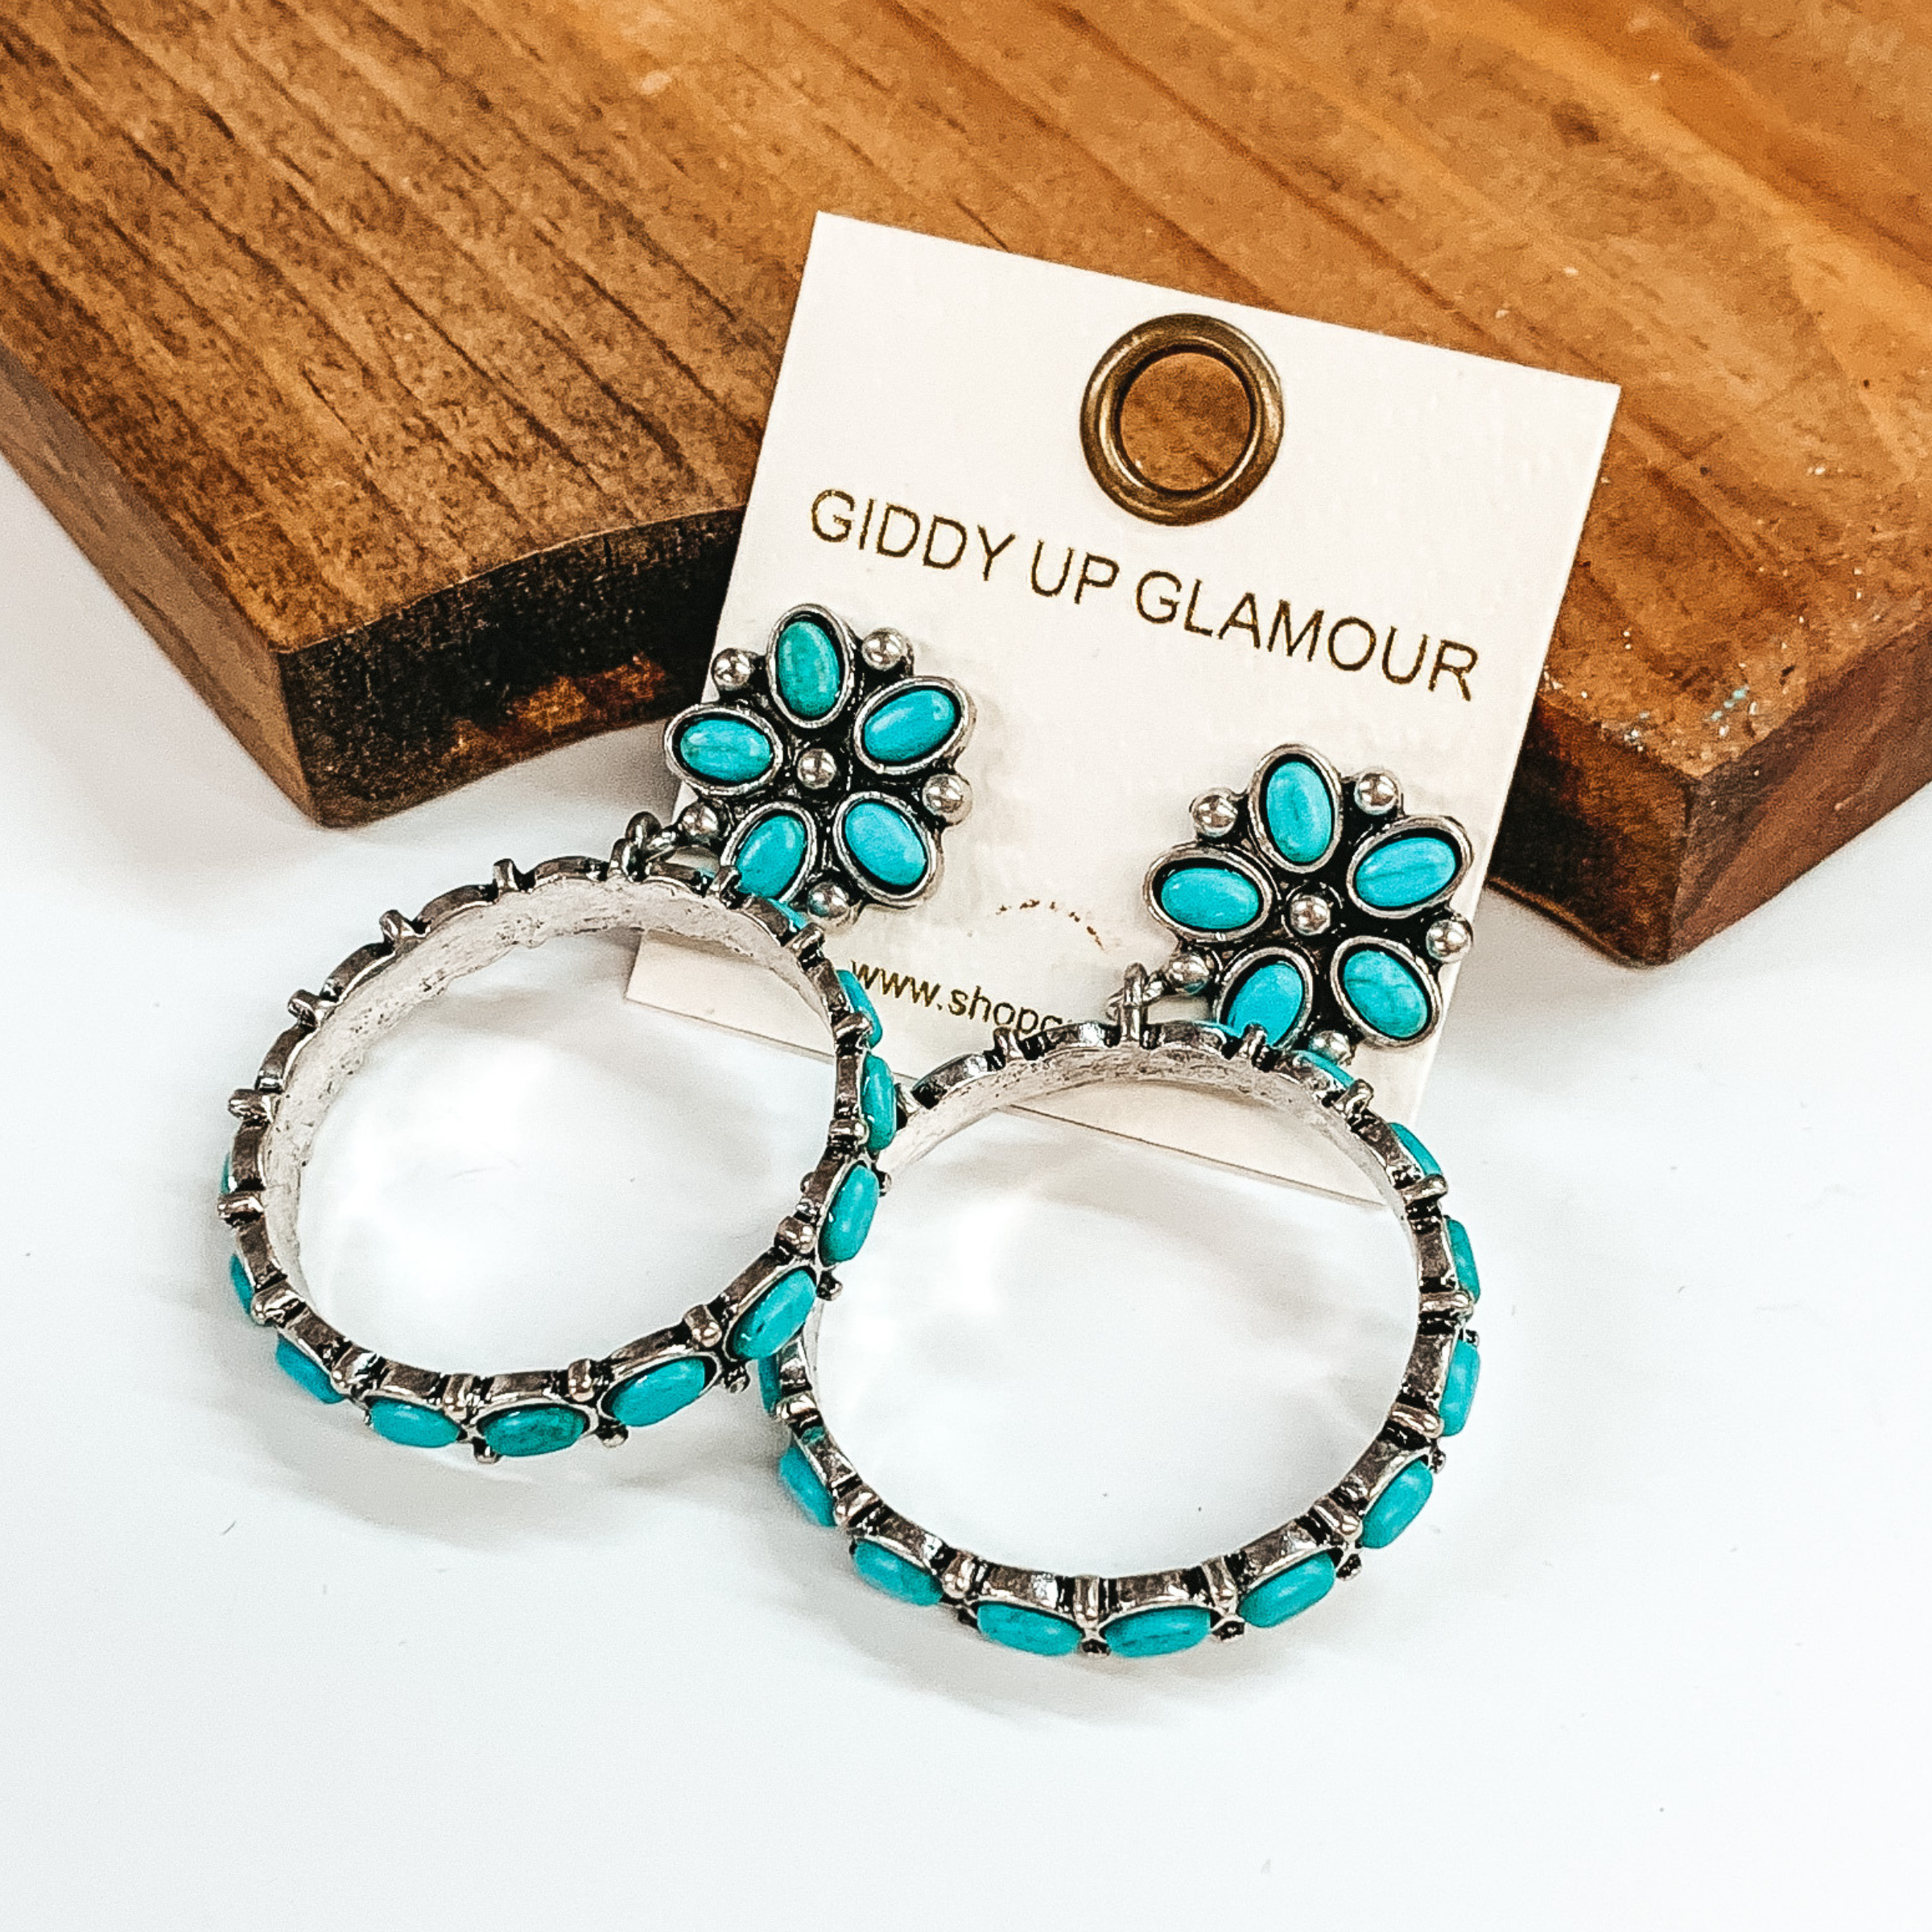 Turquoise flower post earrings outlined in silver and circle drop pendant with turquoise stones around. Pictured in a brown block and white background.